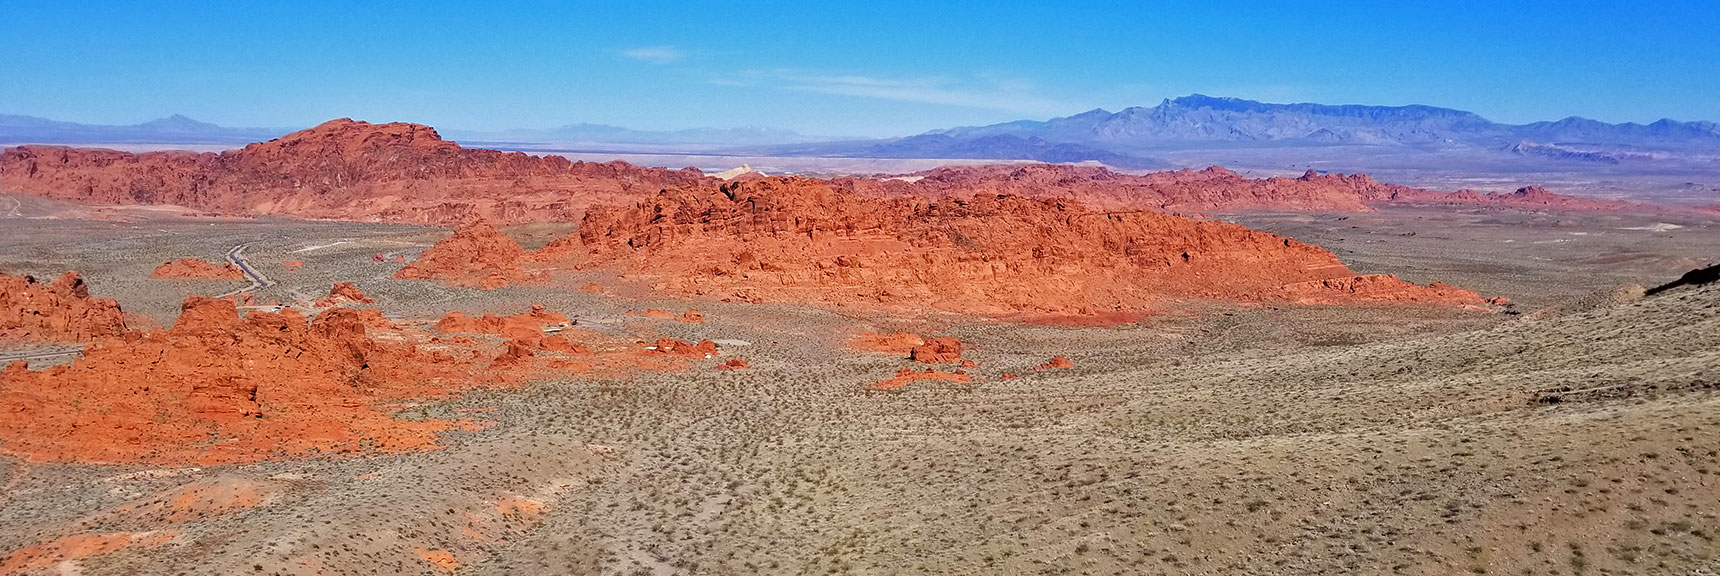 View Toward the Eastern End of the Park | Valley of Fire State Park, Nevada Panorama